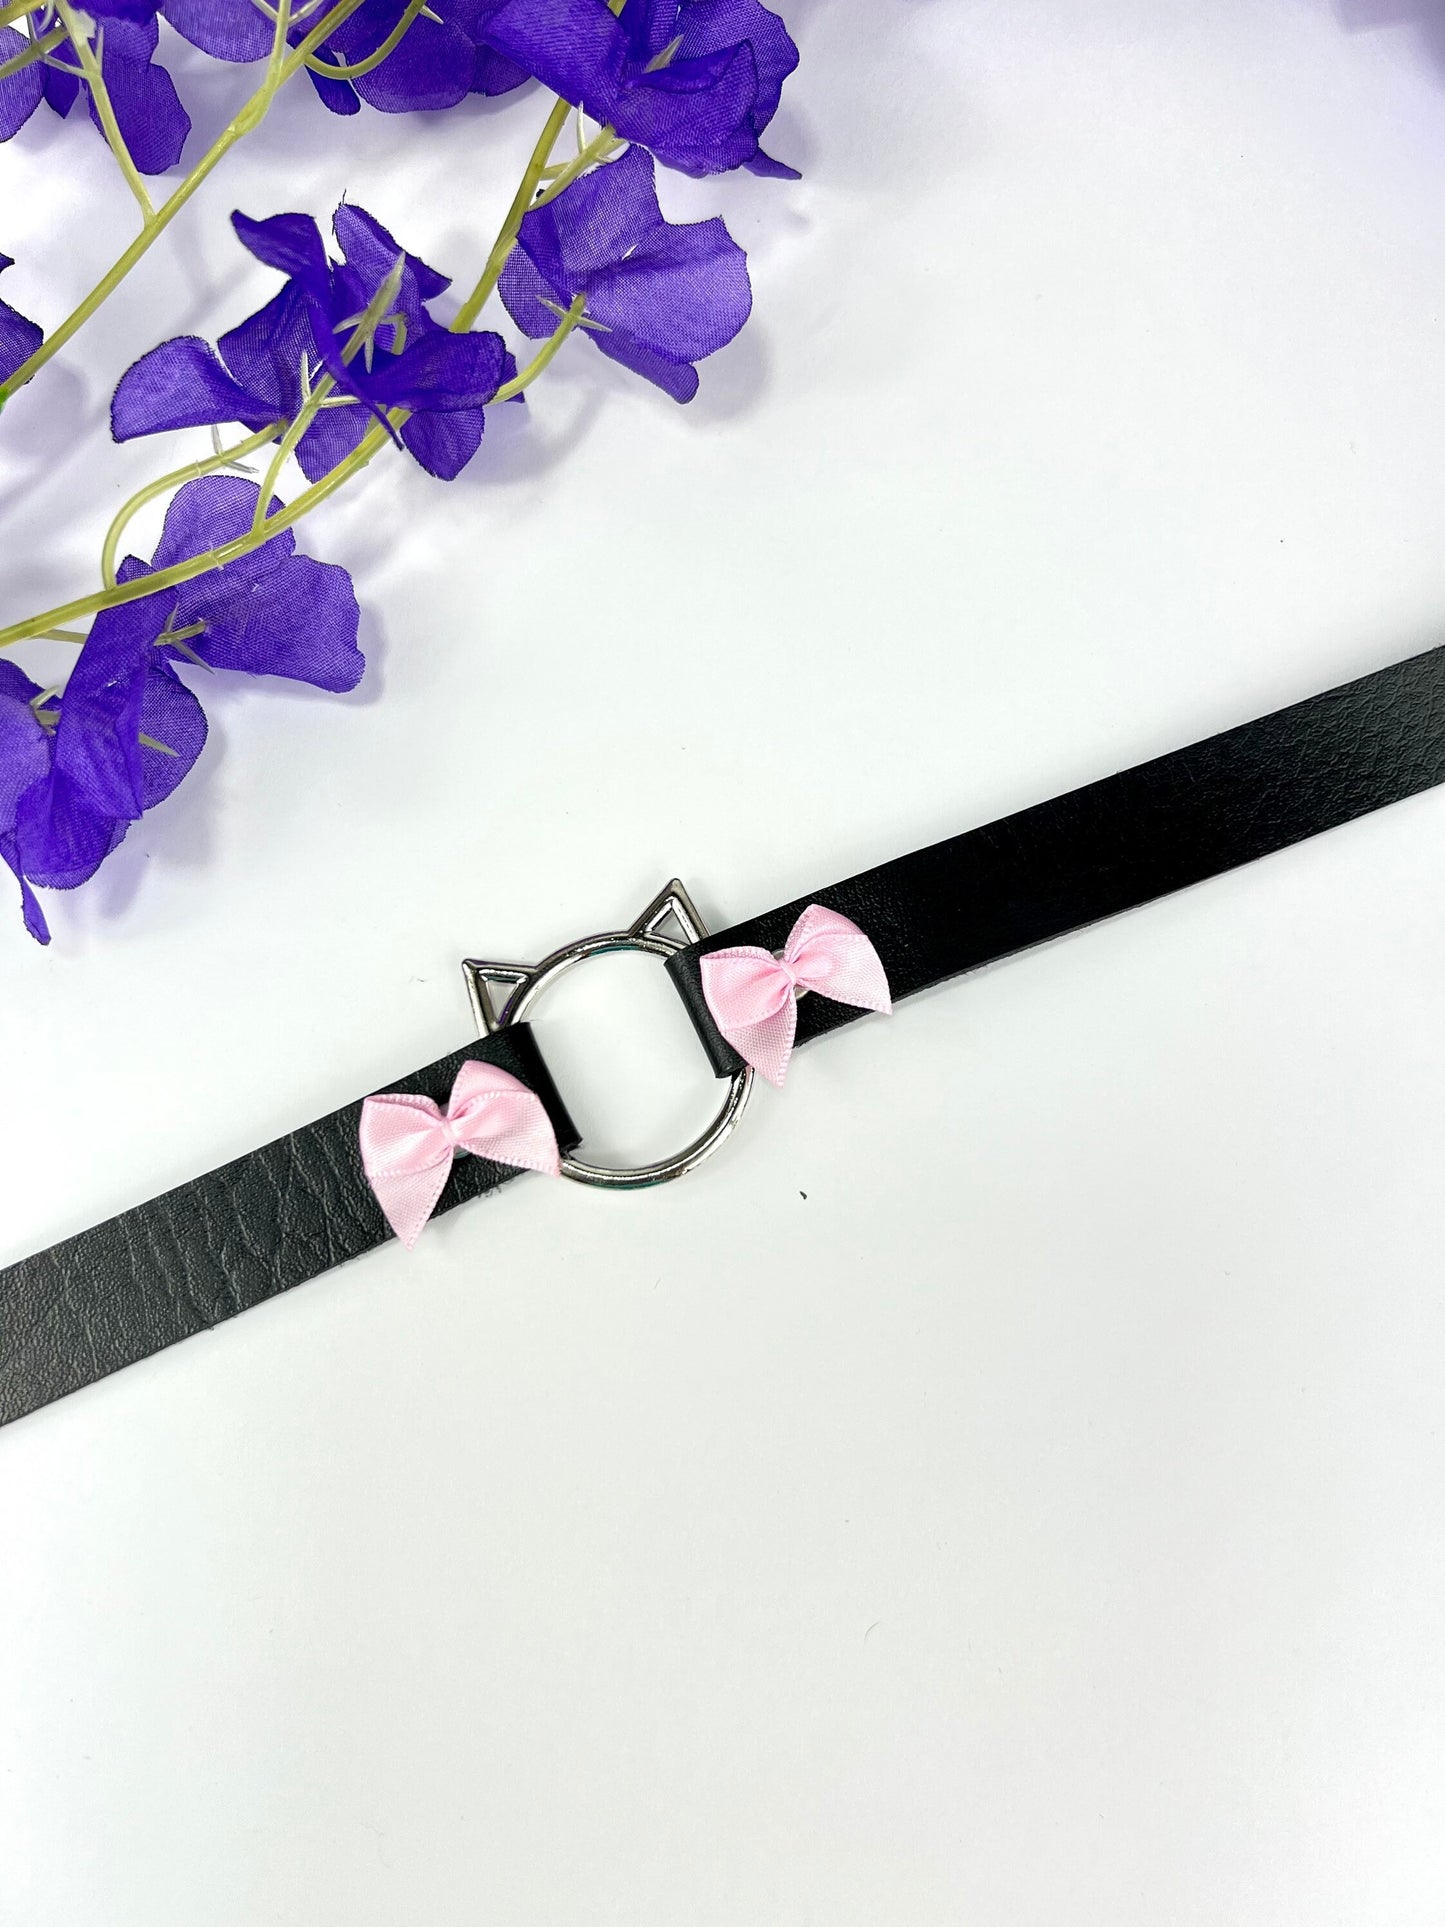 Black Cat Choker with Bows, Adjustable Faux Leather Cat Collar